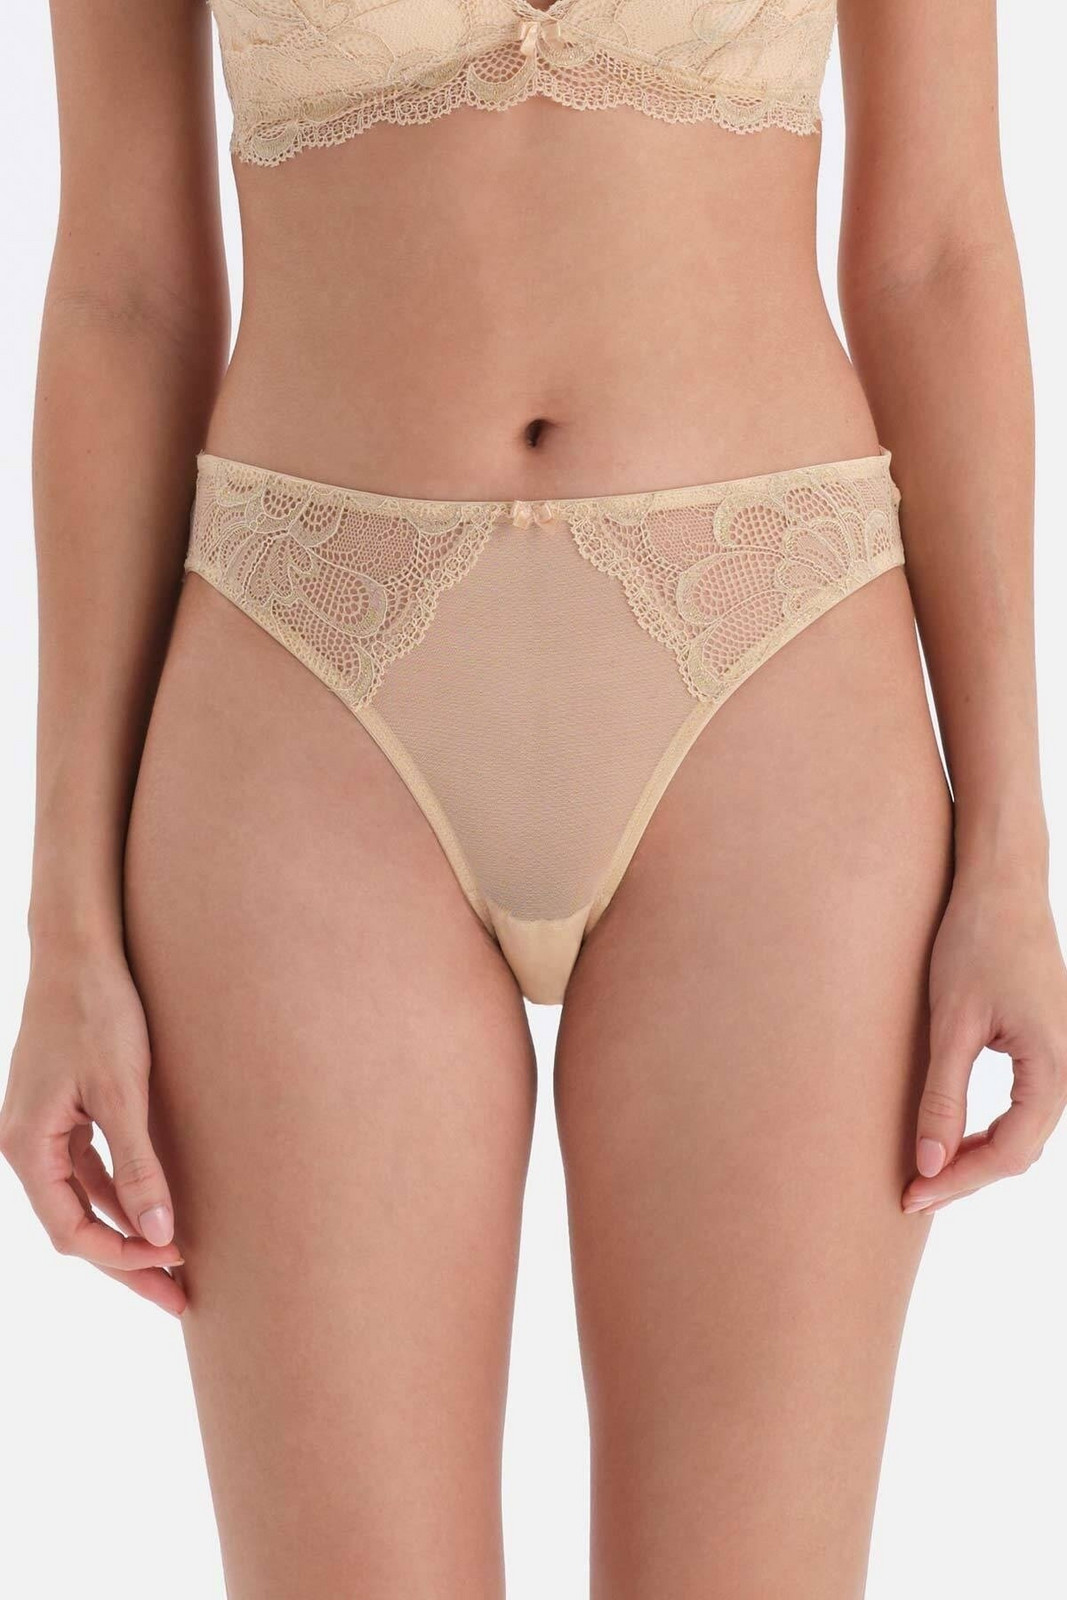 Dagi Beige Lace Panties with Accessory Detail.